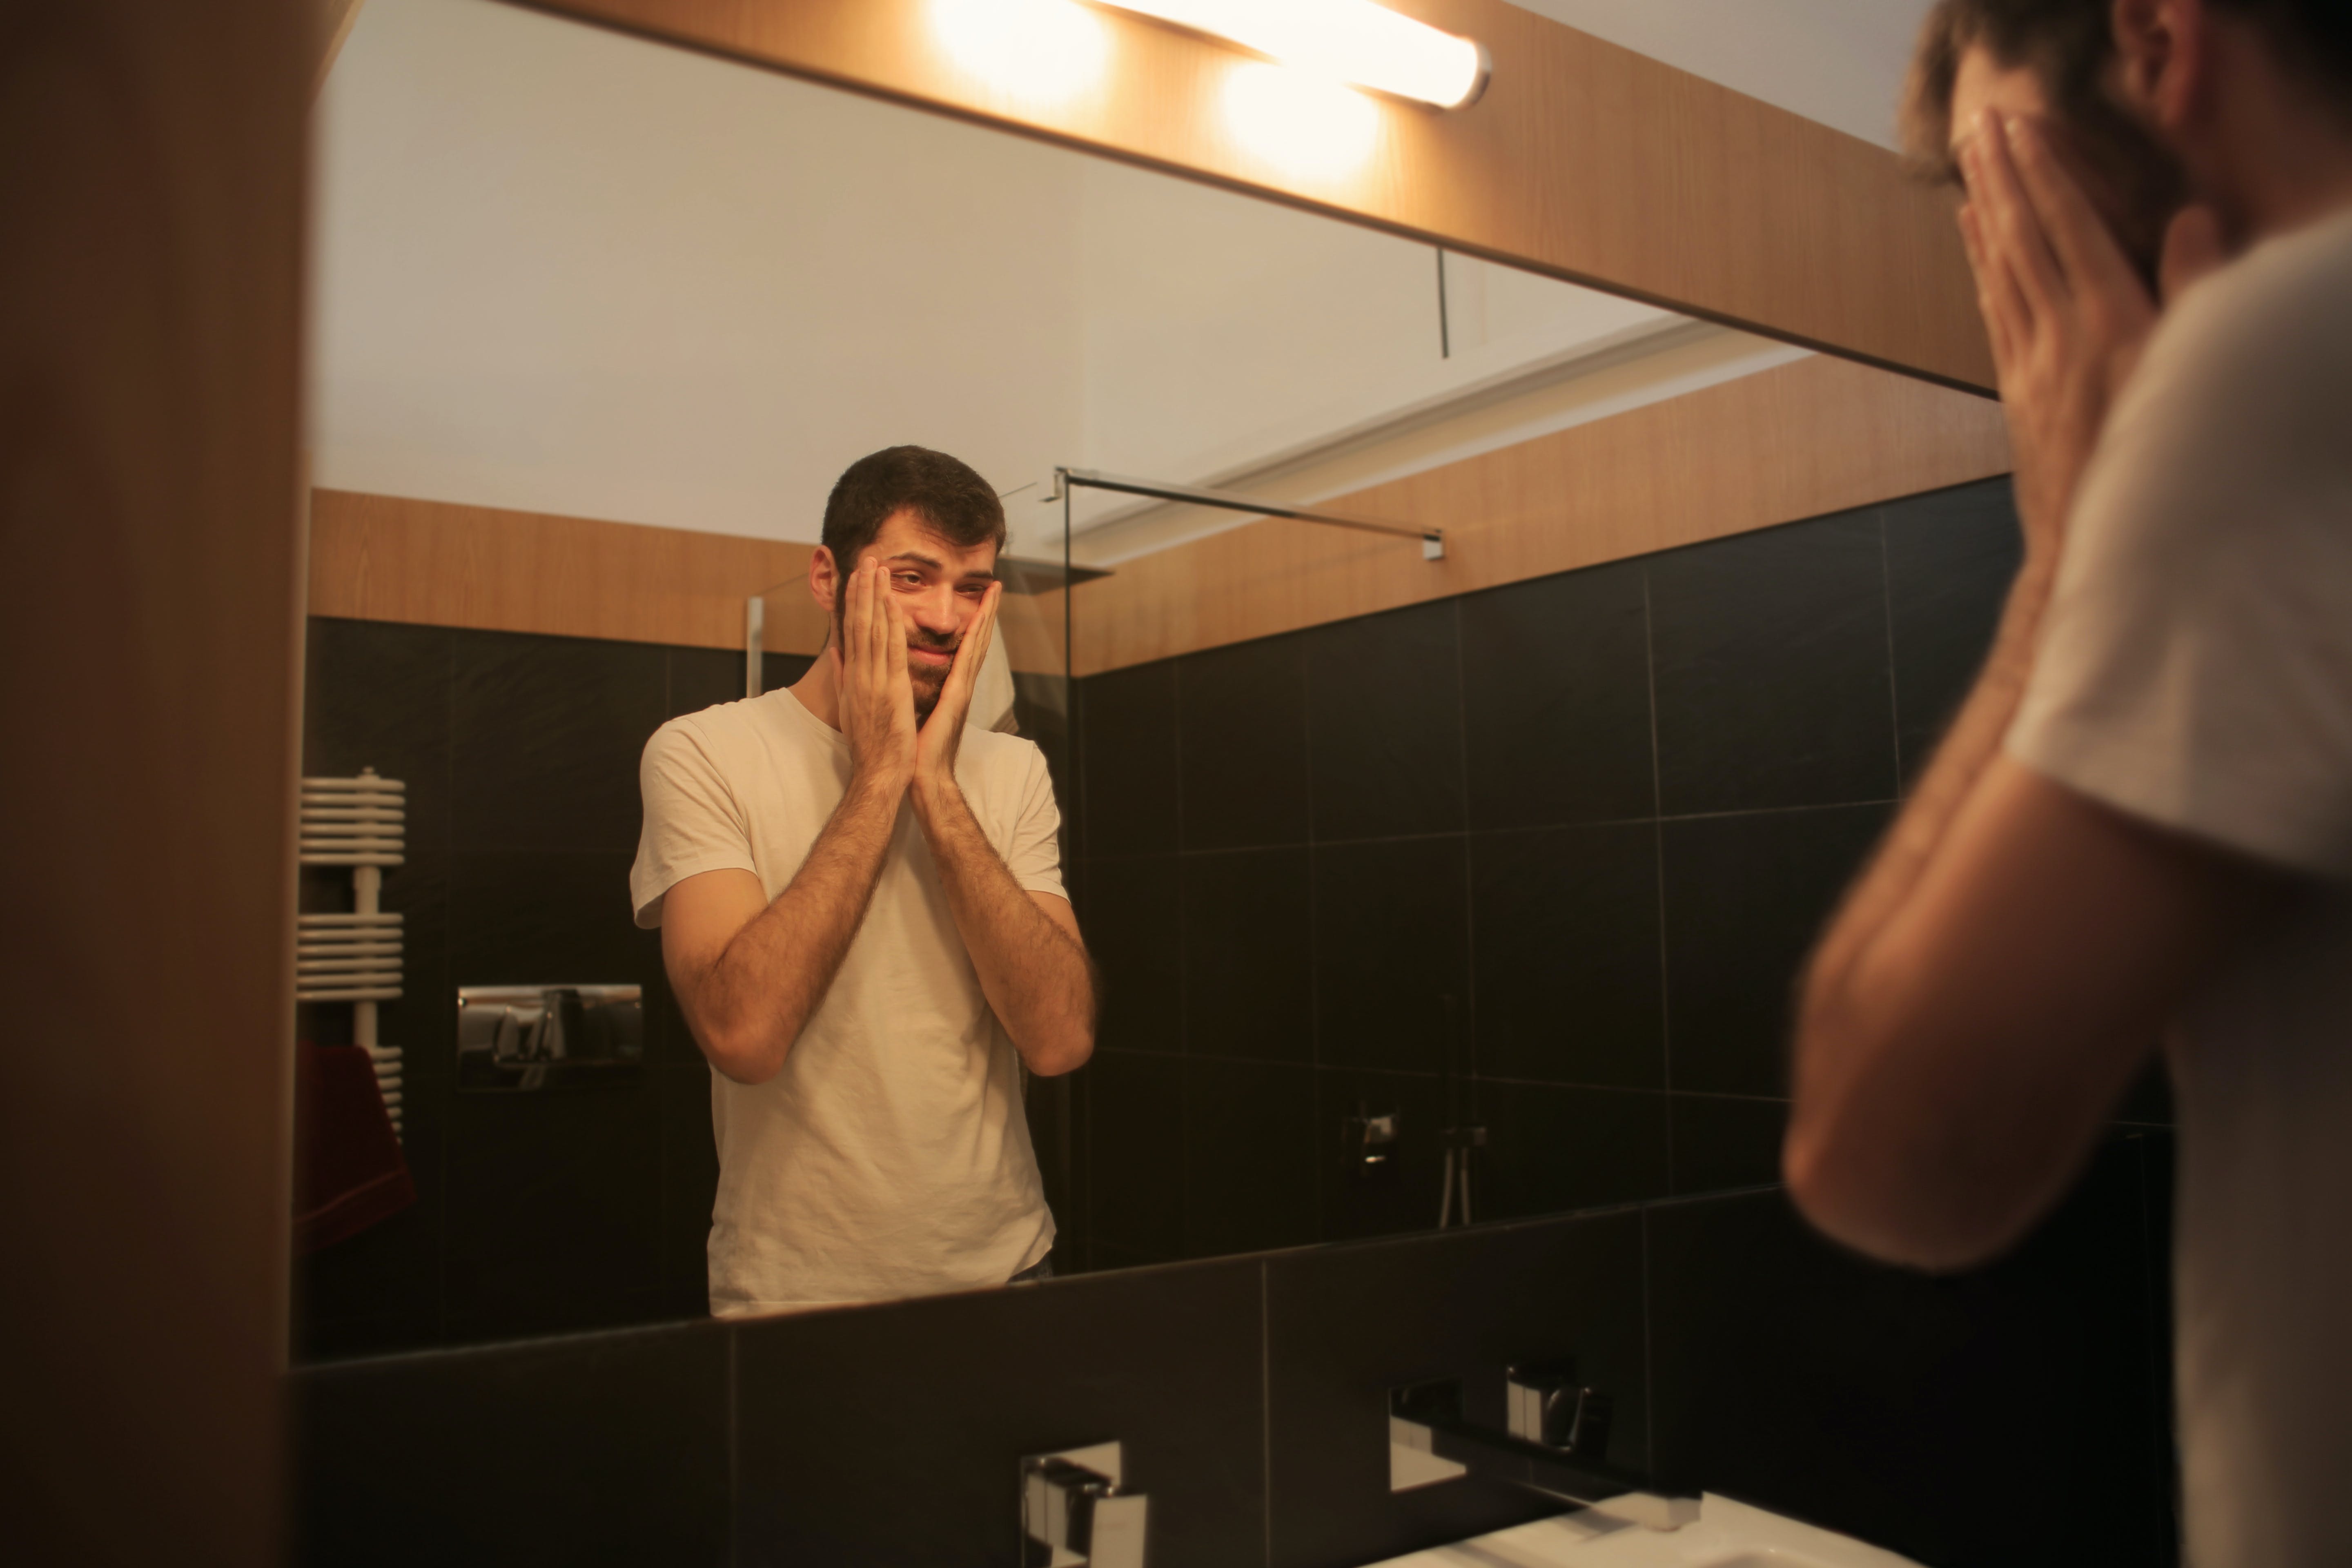 A man in the bathroom looking in the mirror┃Source: Pexels